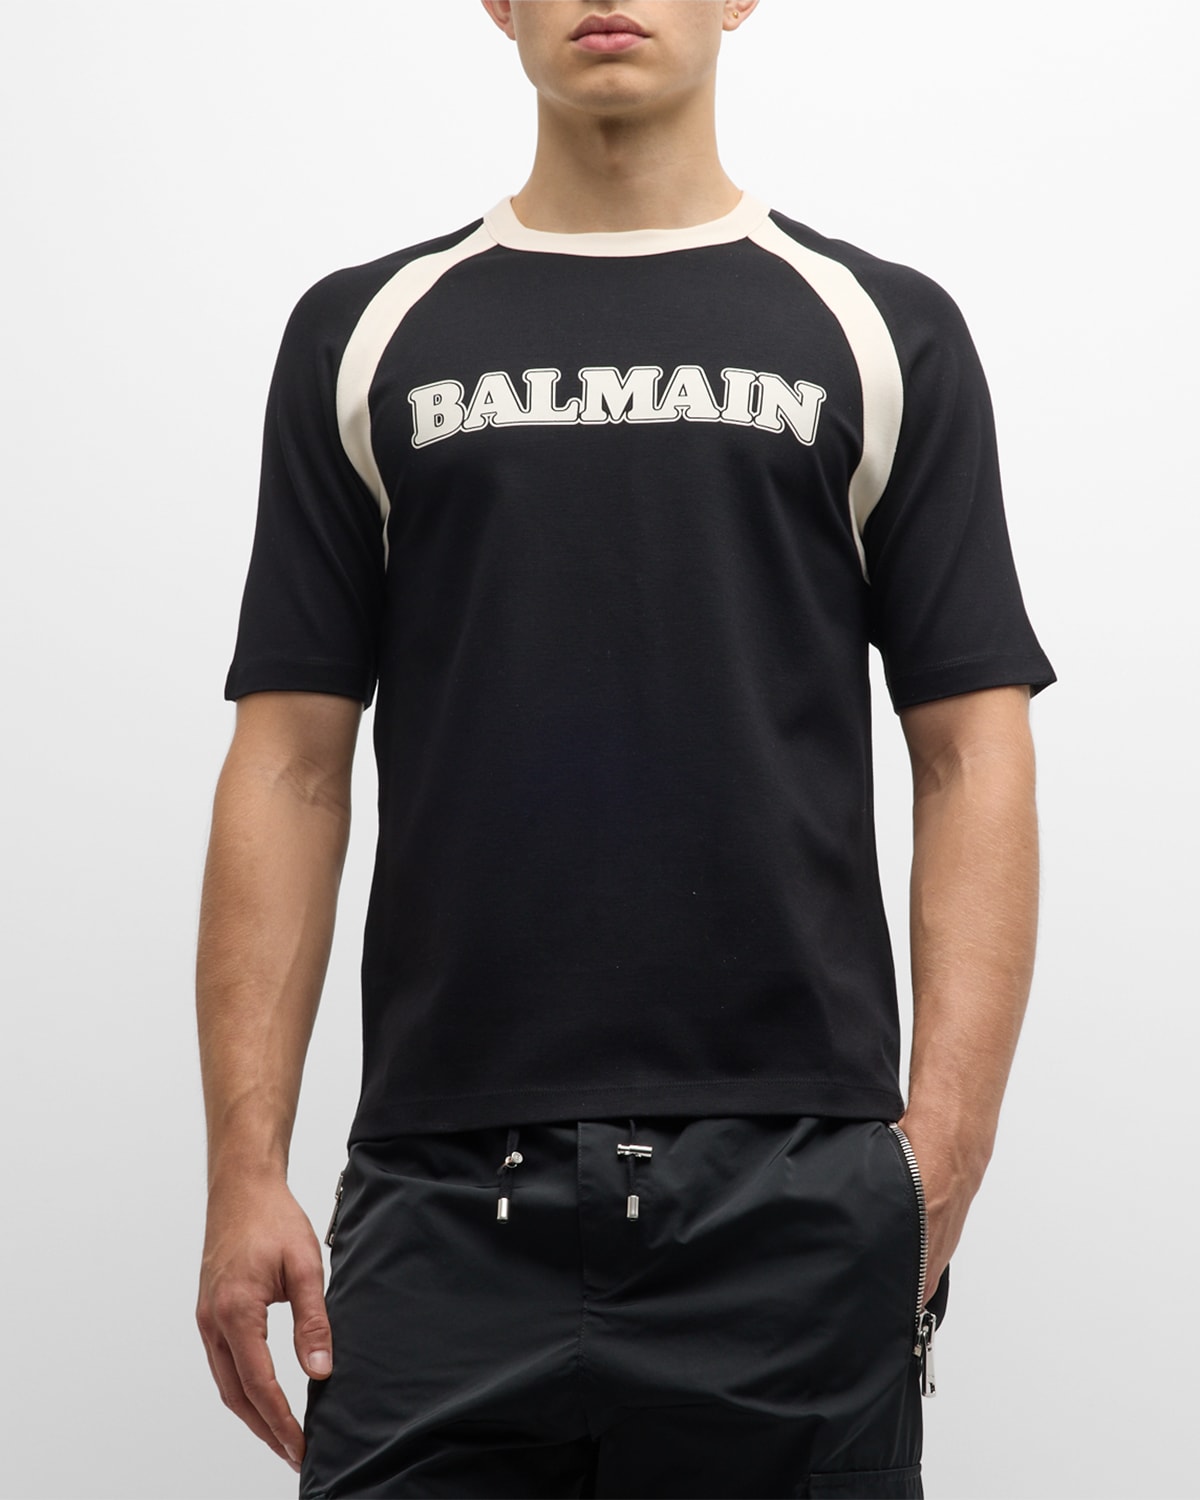 Balmain x Barbie's Collection Pops Up at Neiman Marcus – Footwear News